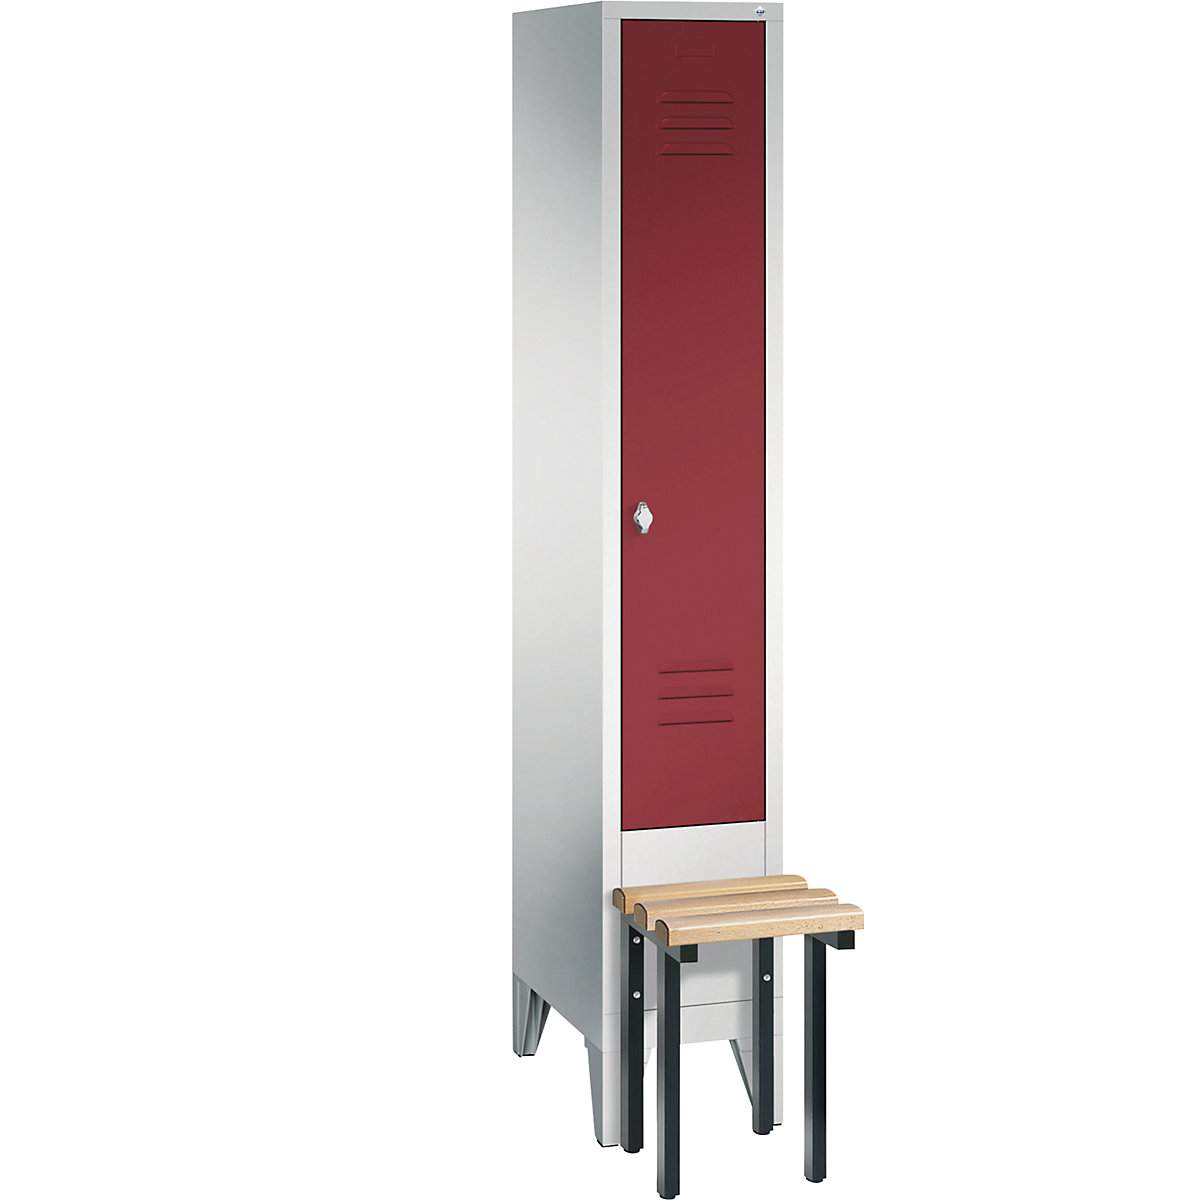 CLASSIC cloakroom locker with bench mounted in front – C+P, 1 compartment, compartment width 300 mm, light grey / ruby red-5